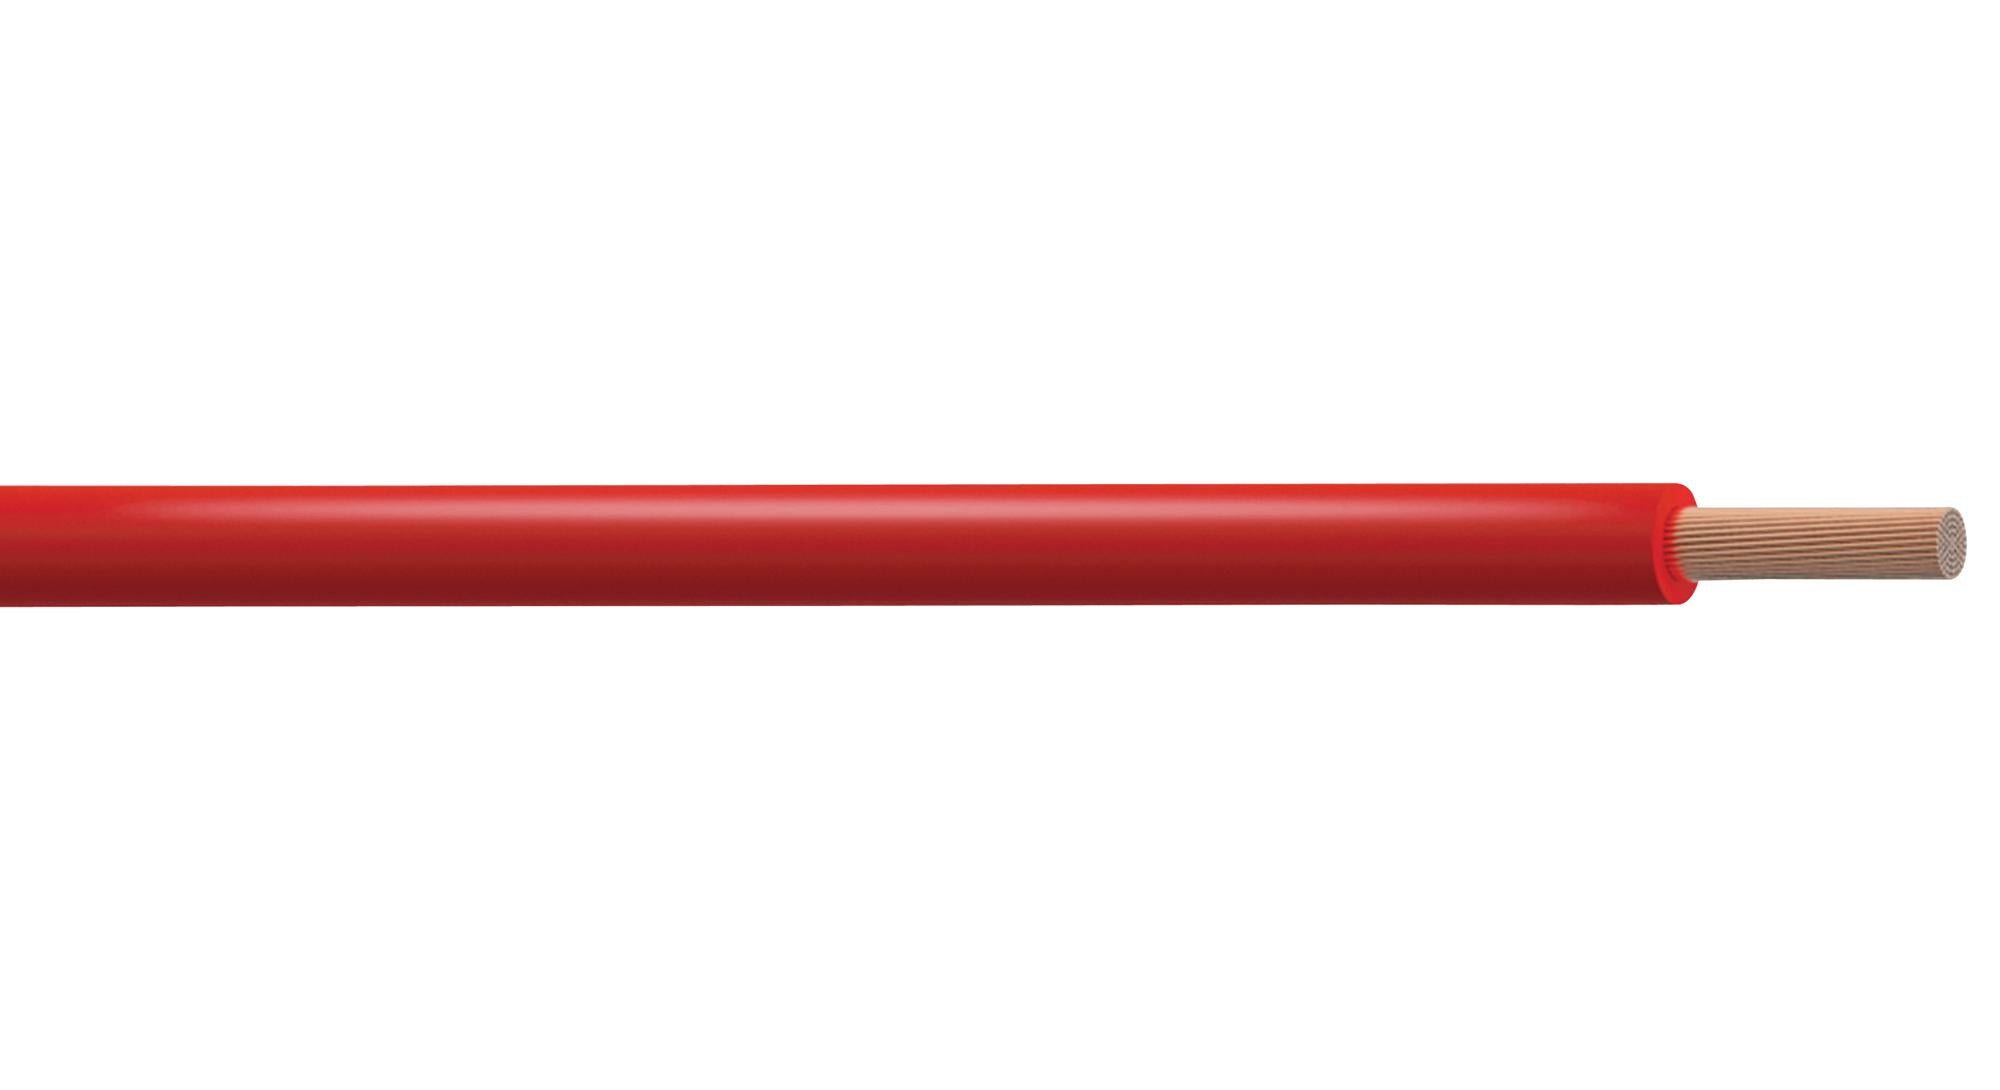 MULTICOMP PRO Single Wire PP001328 TRI RATED WIRE, 2.5MM2, RED, 500M MULTICOMP PRO 2543504 PP001328